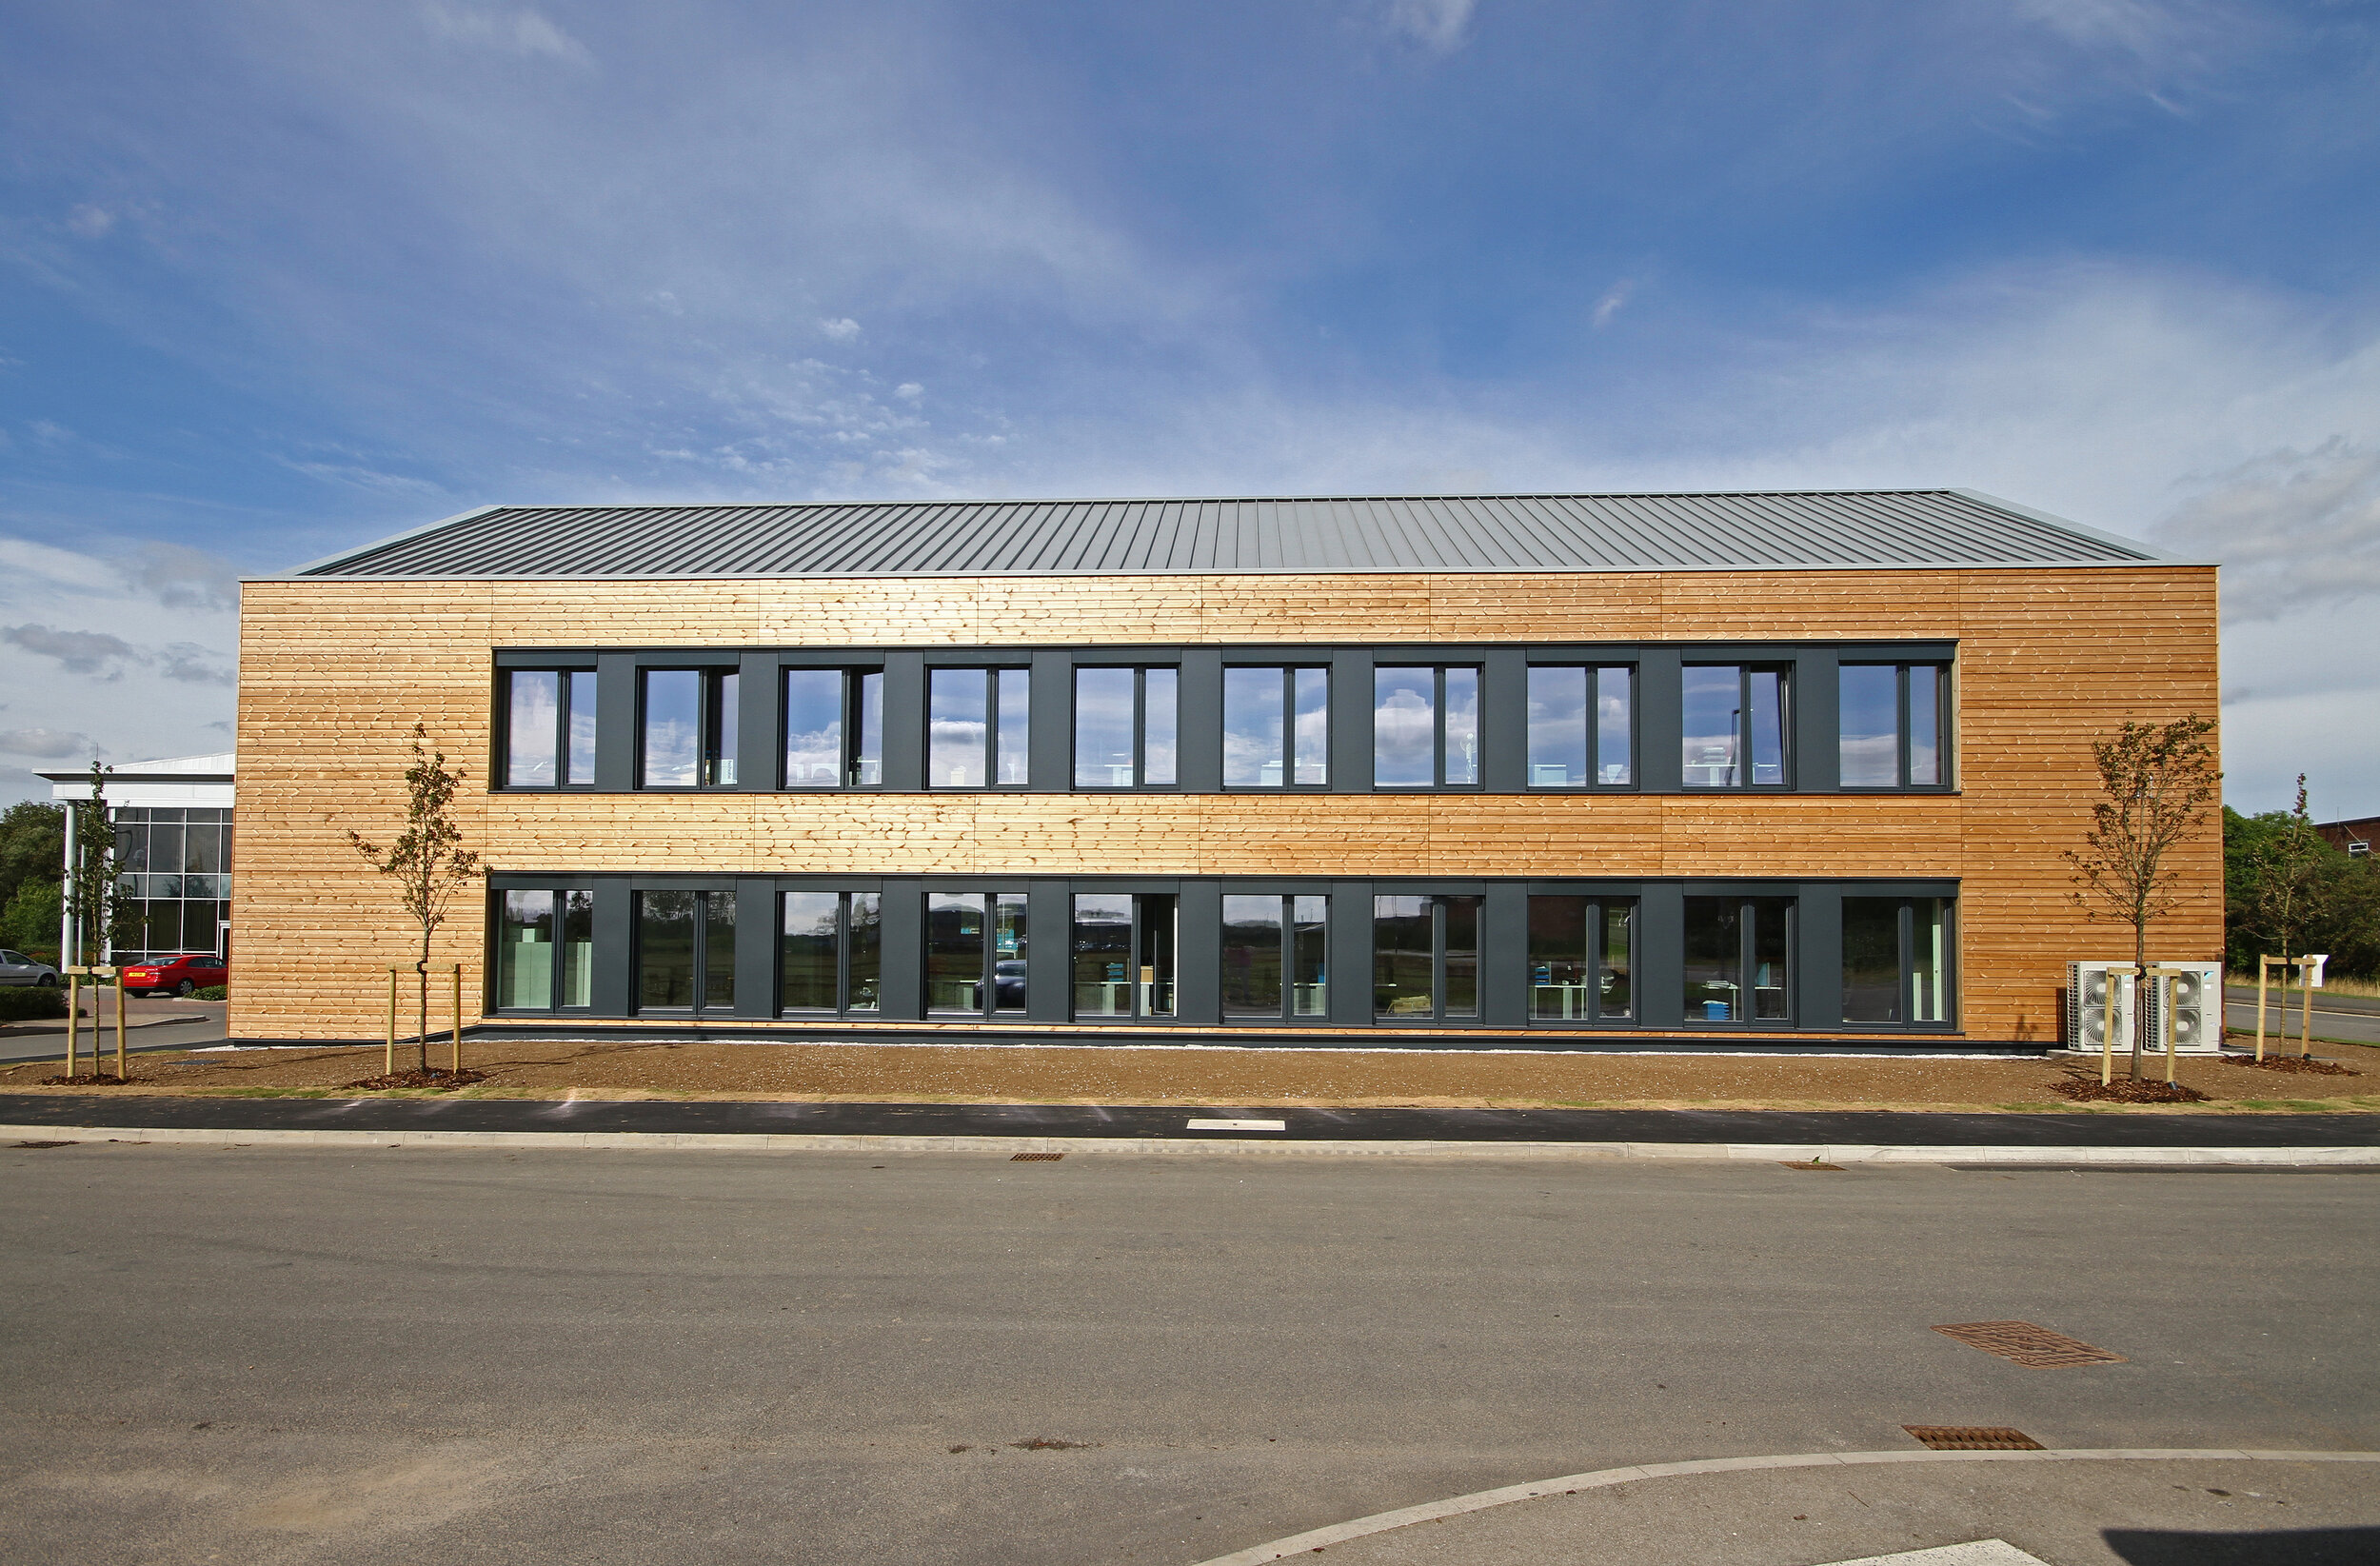 Watermead - the UK's first commercial Passivhaus building